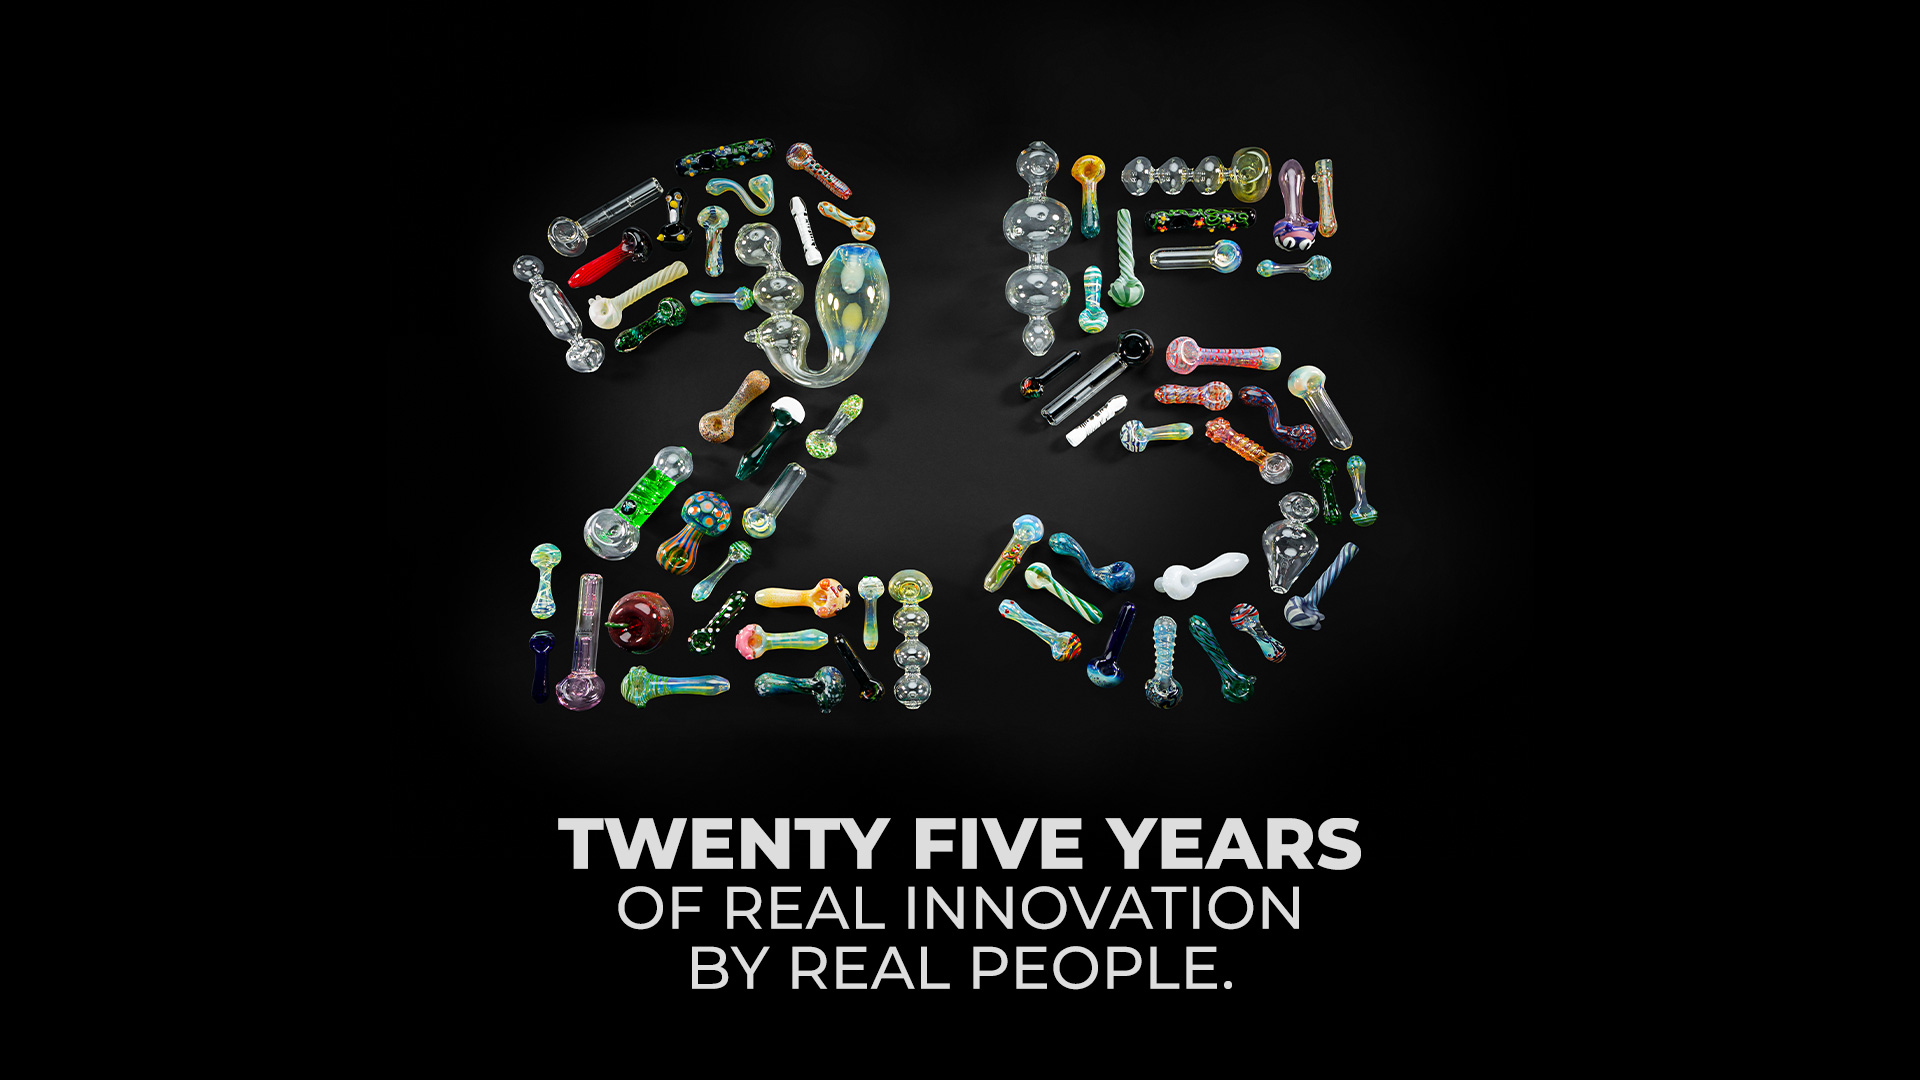 Celebrating 25 years of real inovation by real people